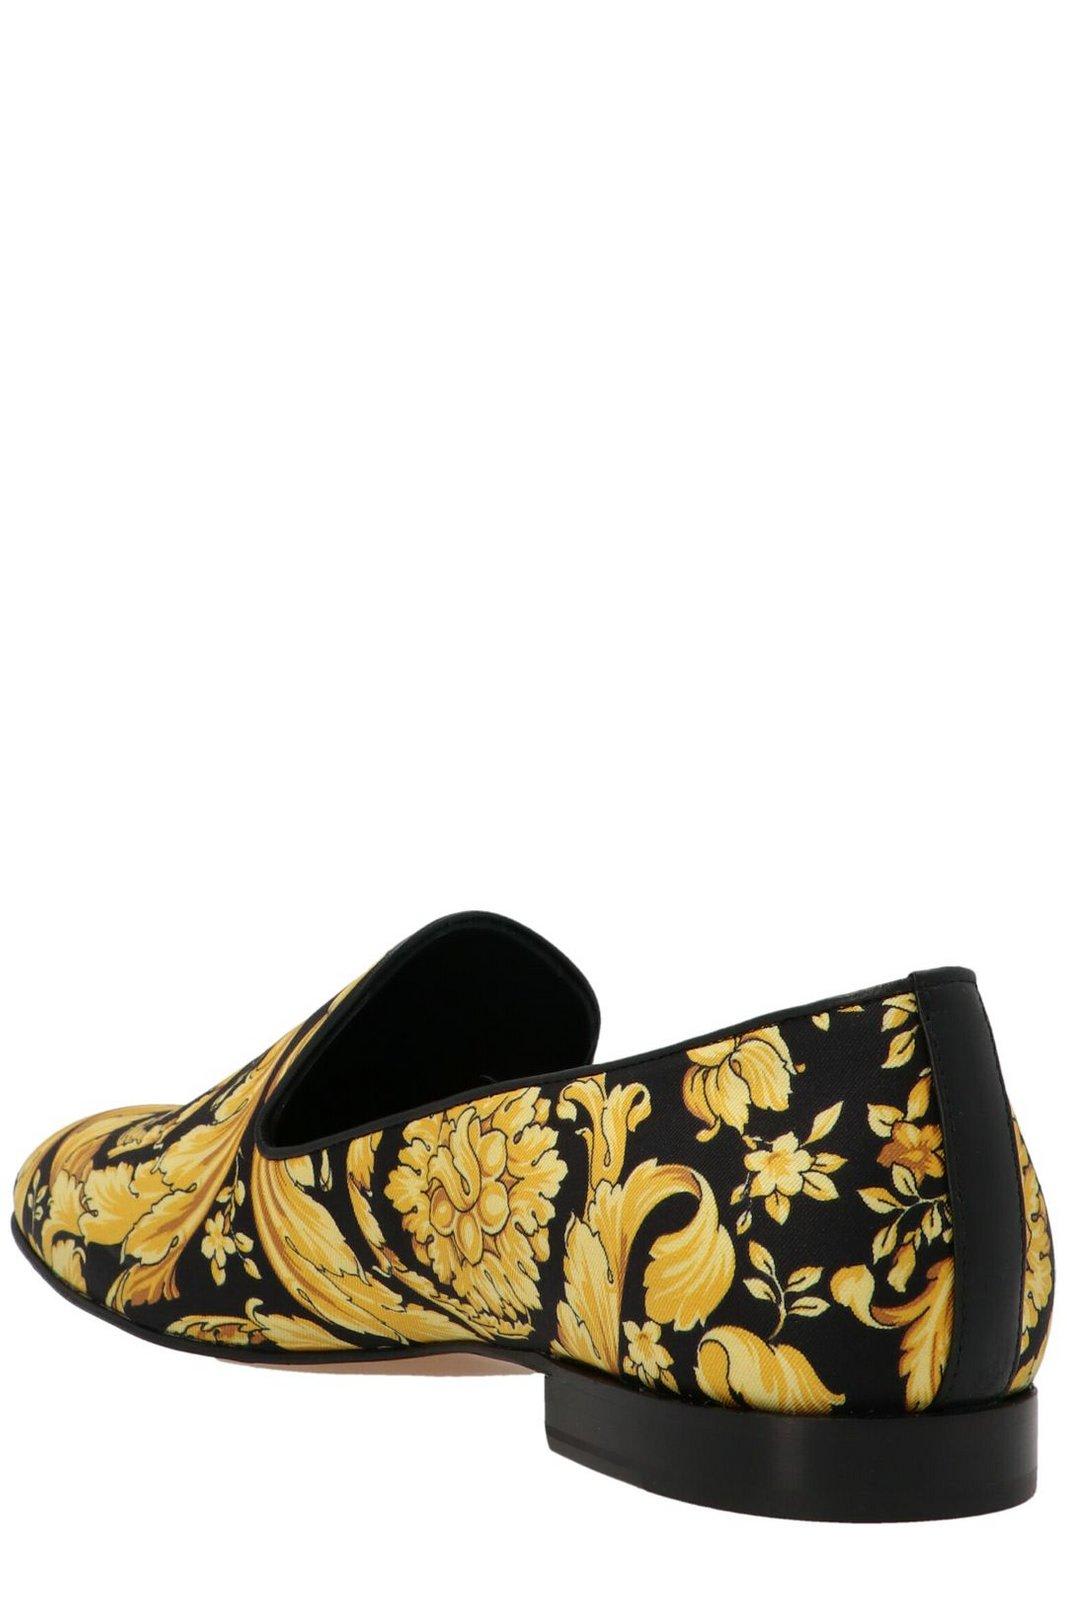 Shop Versace Baroque Pattern Pointed Toe Loafers In Yellow/black